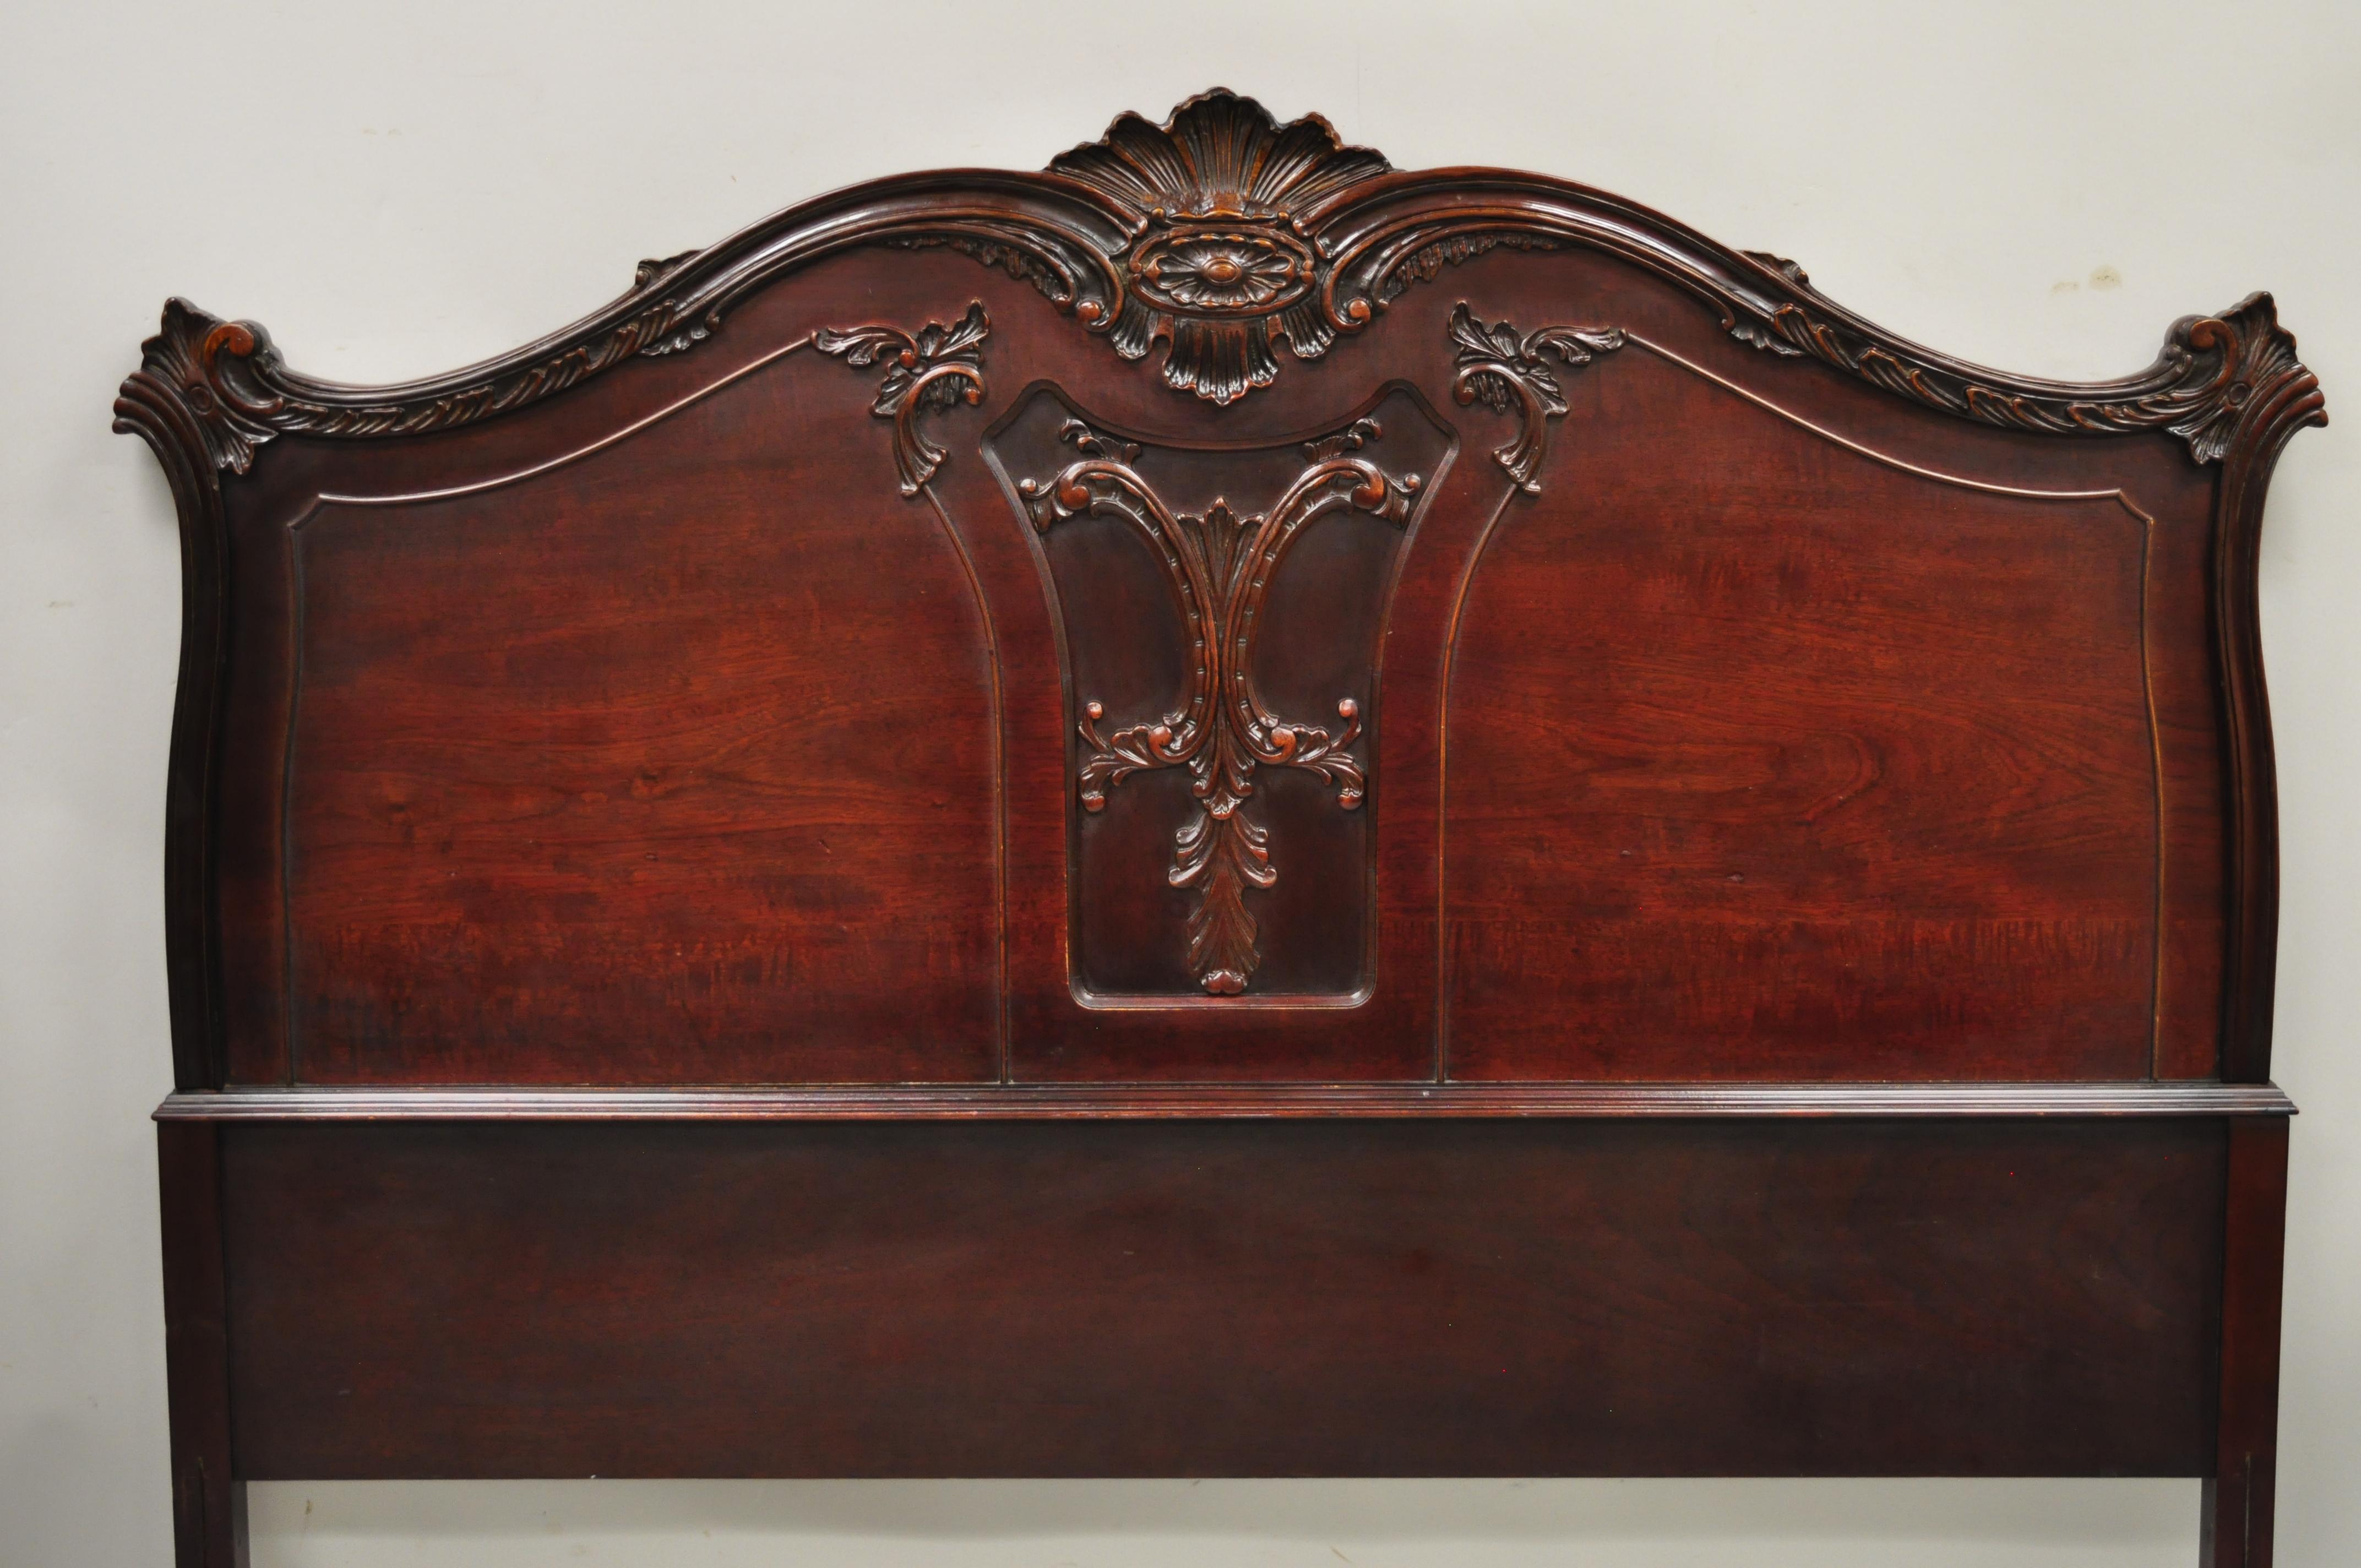 Antique French Style Hollywood Regency carved mahogany full size bed headboard. Item features beautiful wood grain, nicely carved details, very nice antique item, quality American craftsmanship, great style and form. Circa Early to Mid 1900s.